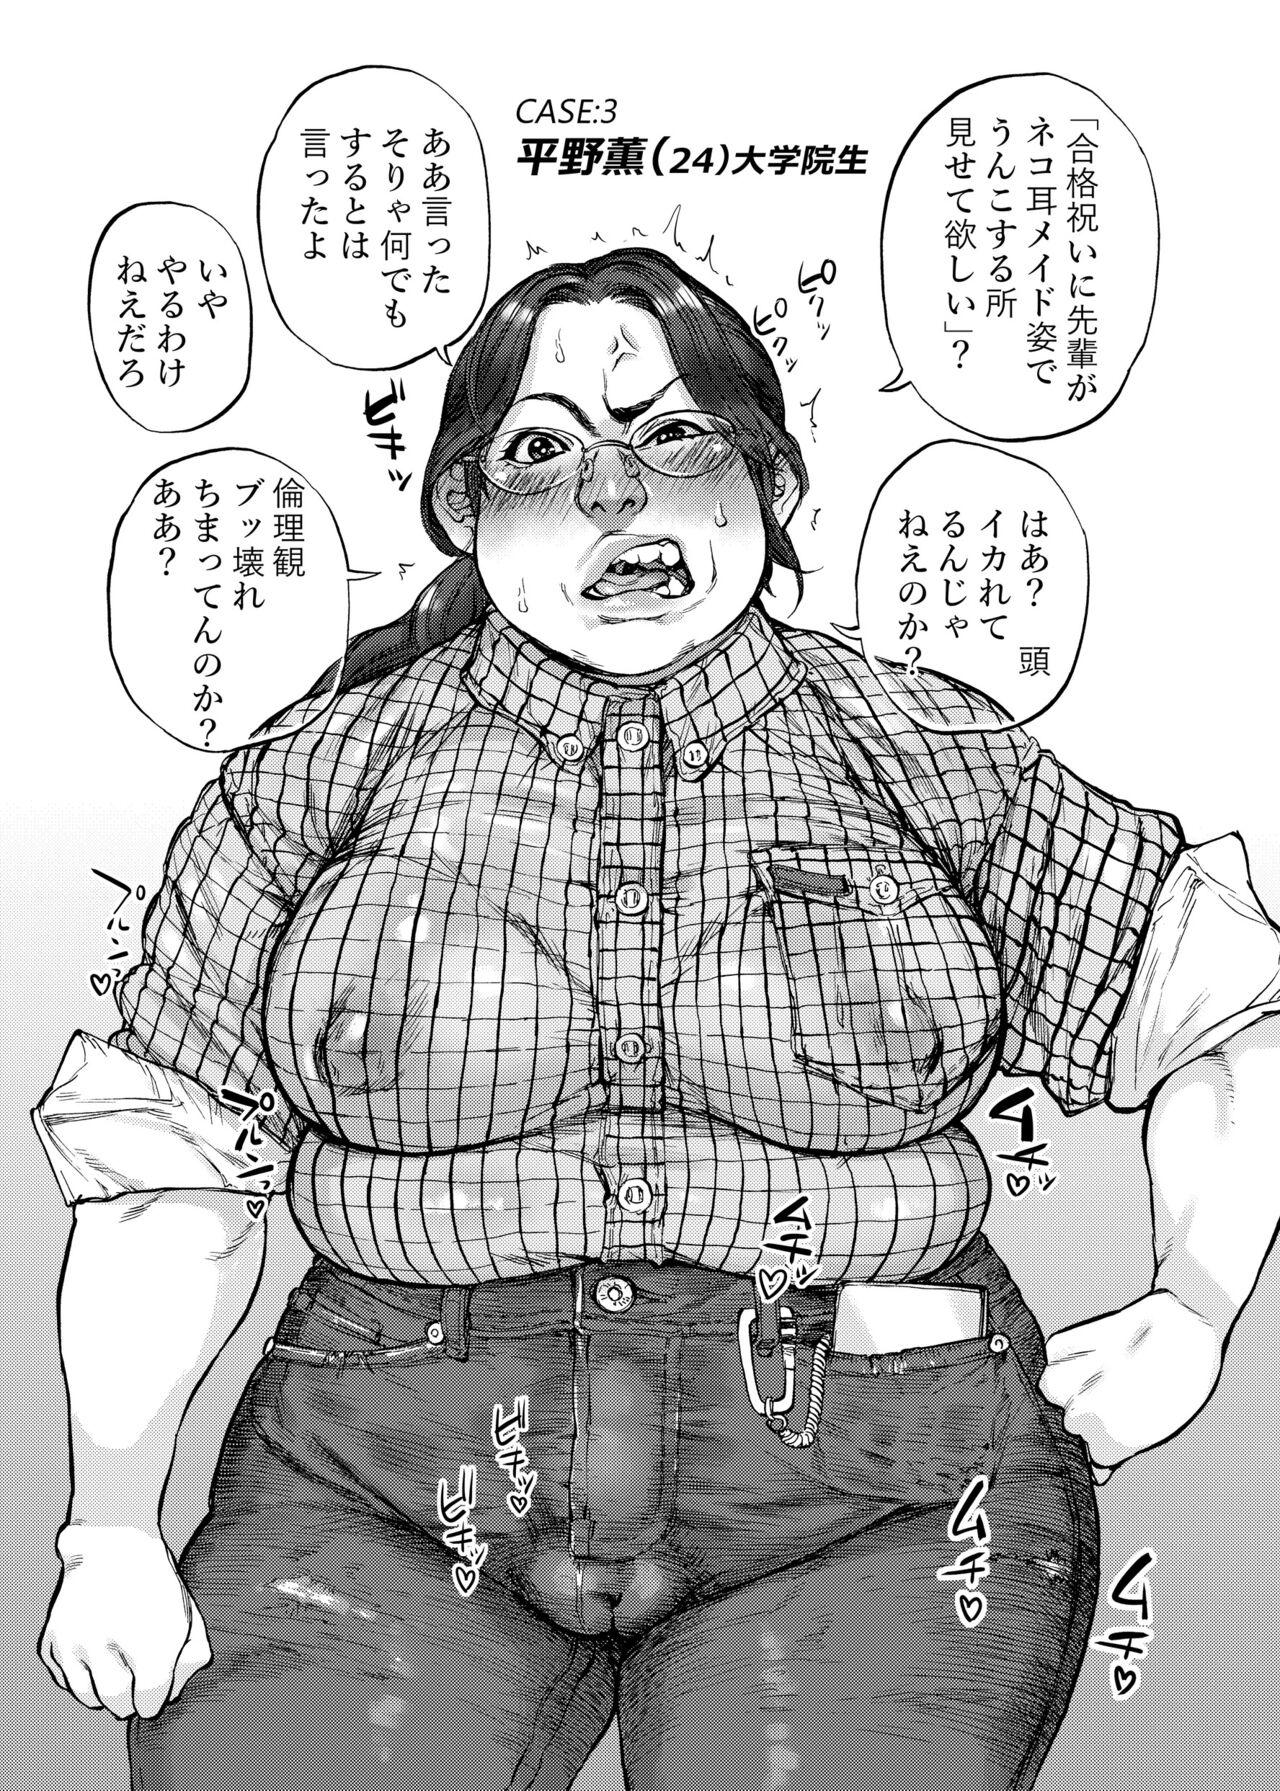 Groupfuck The Scat Encyclopedia of the Strong Heroine Vol.1 Hunk - Page 7